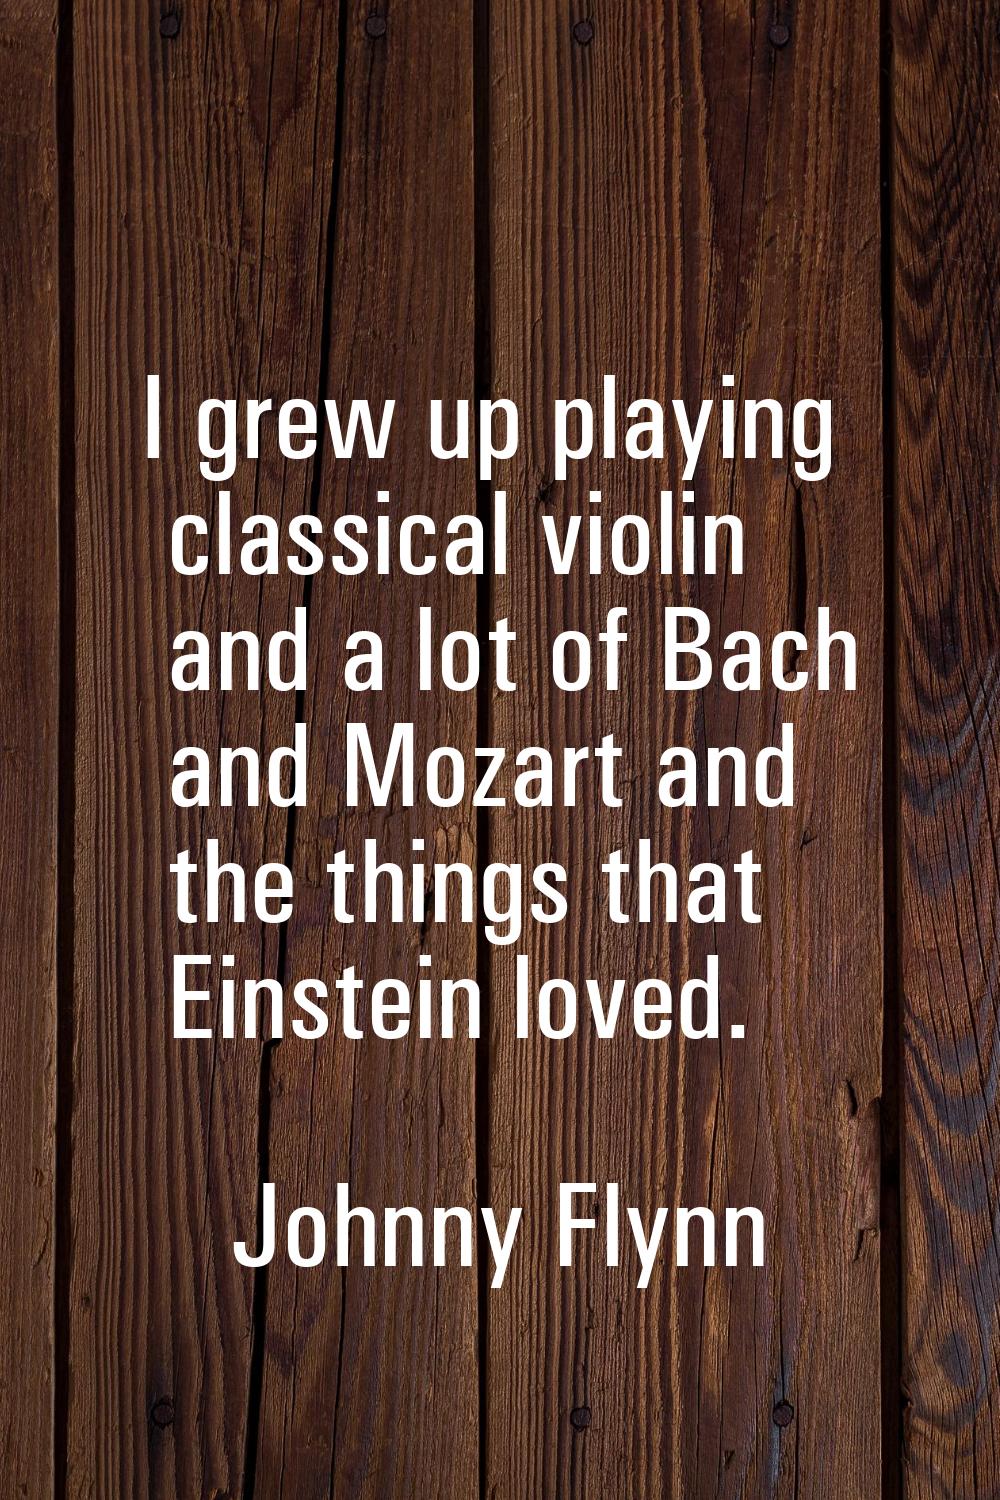 I grew up playing classical violin and a lot of Bach and Mozart and the things that Einstein loved.